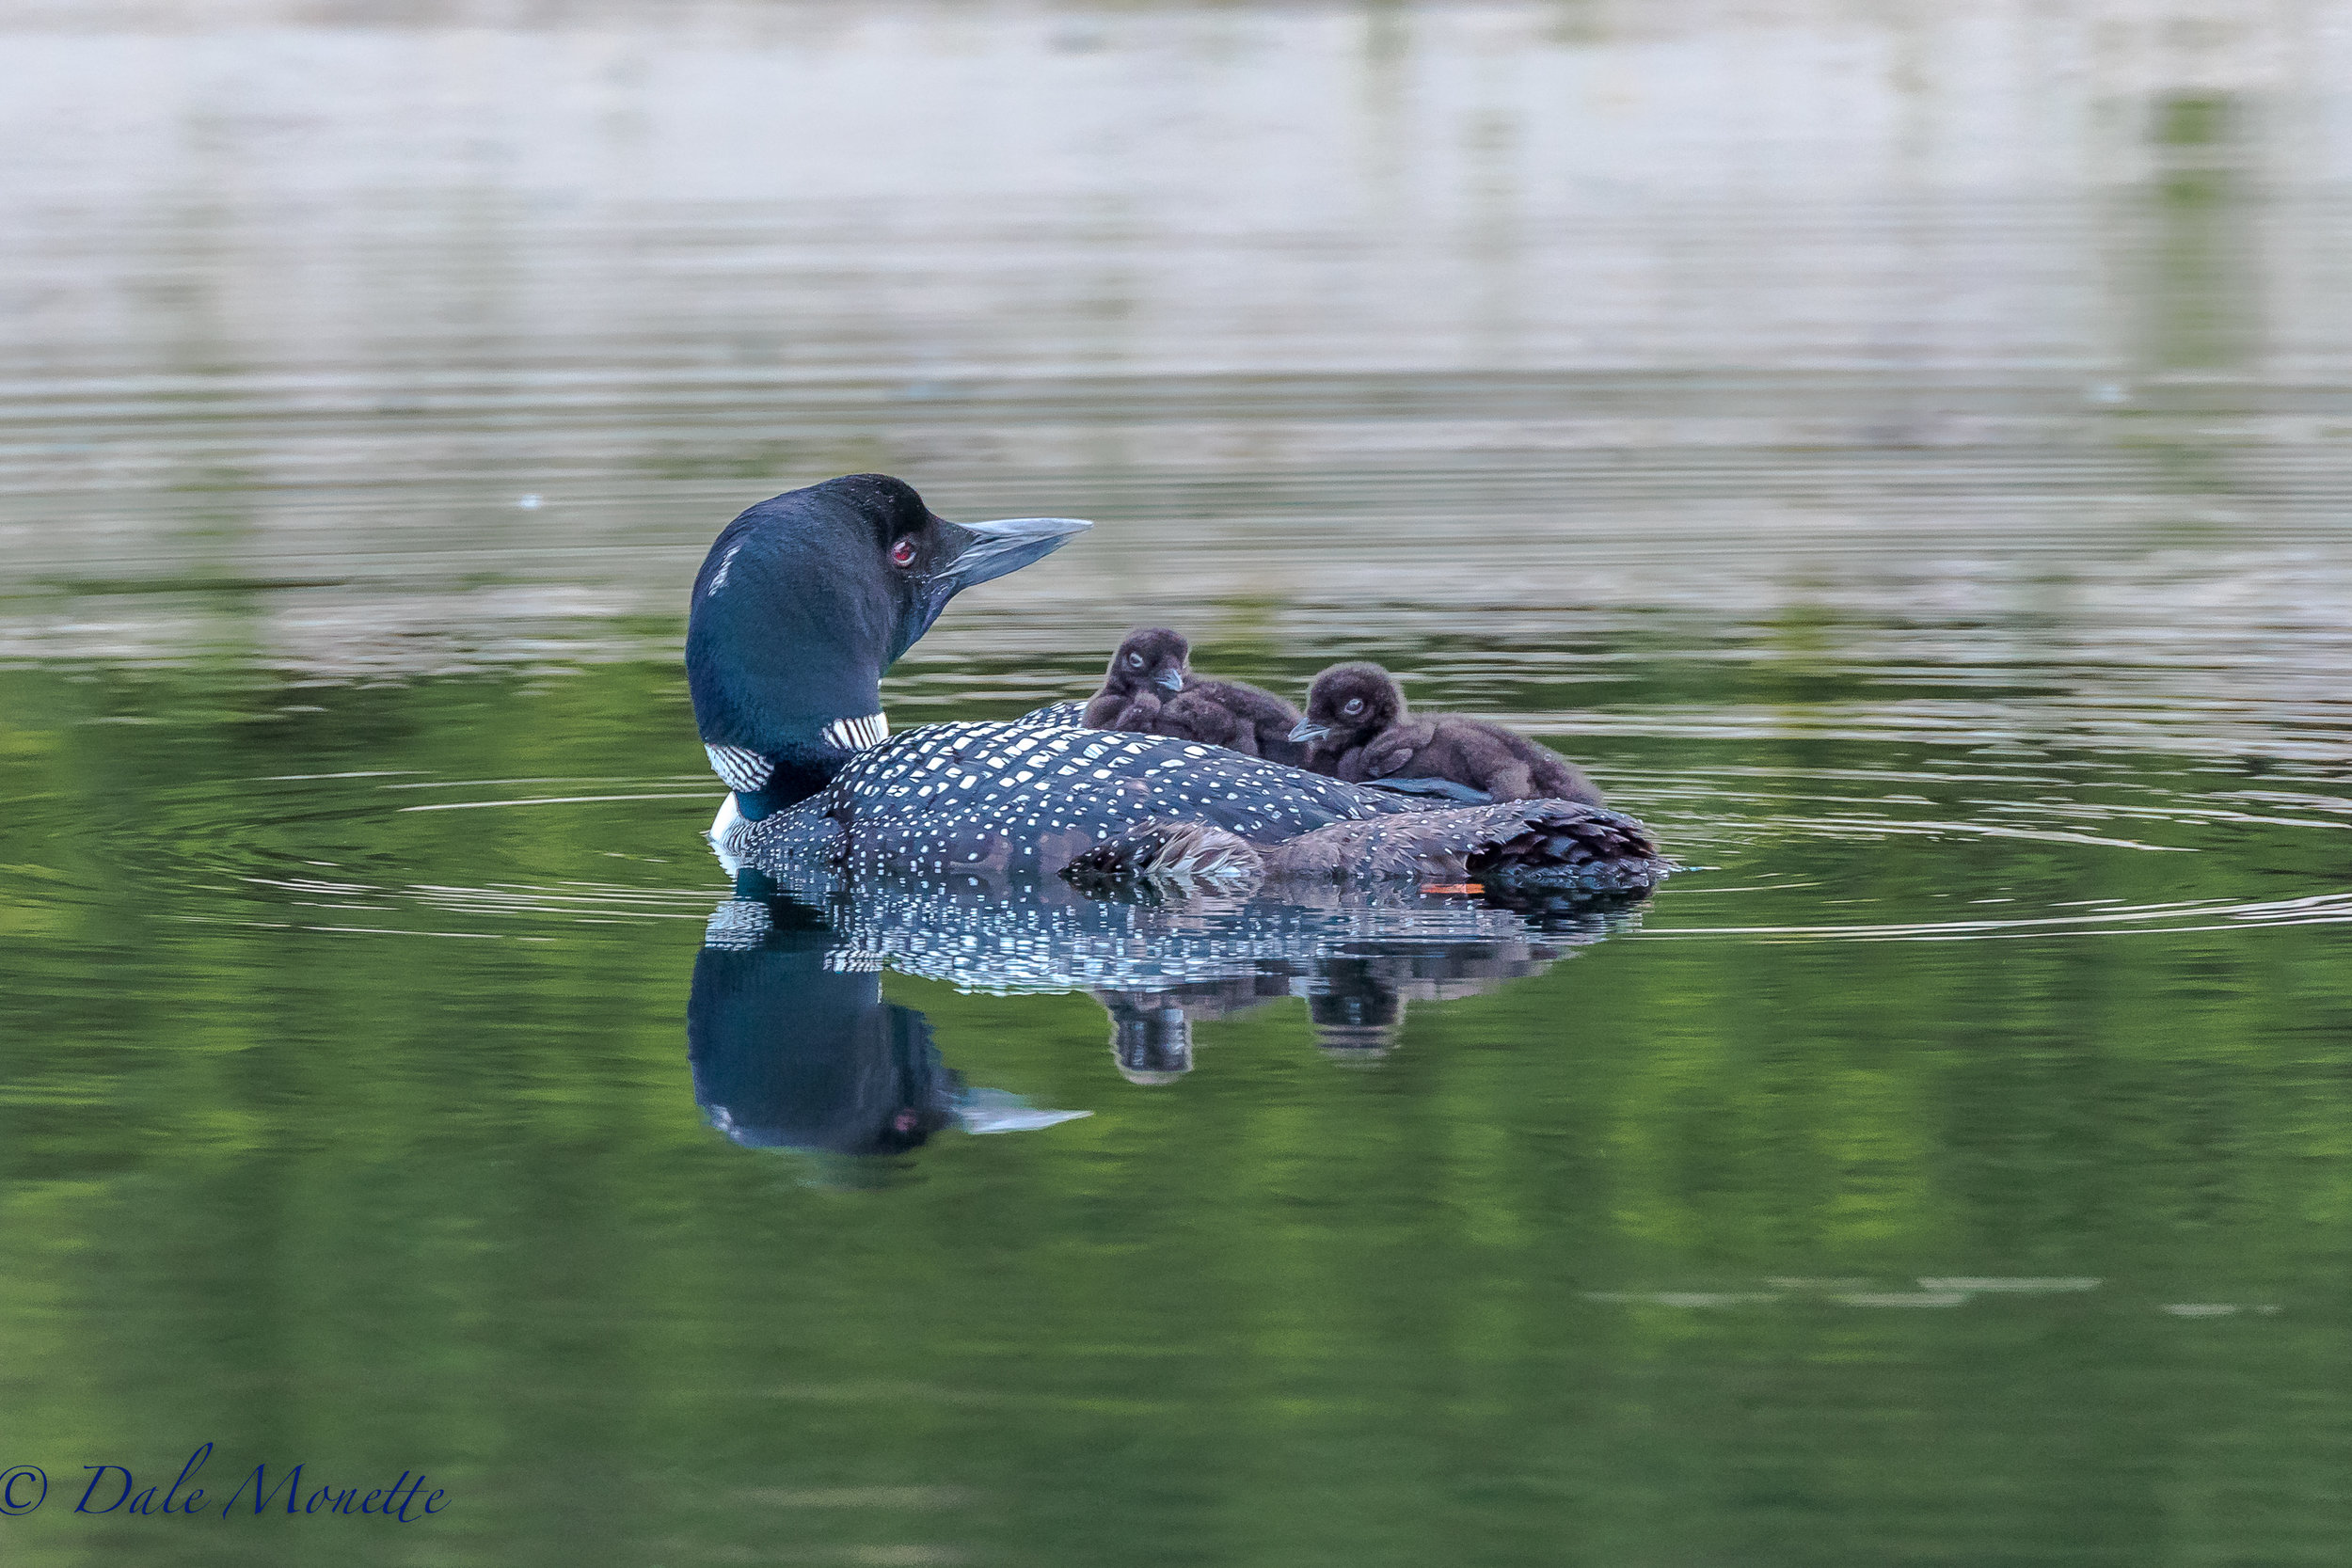   AND HERE THEY WERE WITH THE CHICKS JUST A FEW DAYS OLD: &nbsp;On the weekly loon survey yesterday we had a boat breakdown in this loons territory. &nbsp;While we were looking at the motor trying to figure out the problem my favorite Quabbin loon we